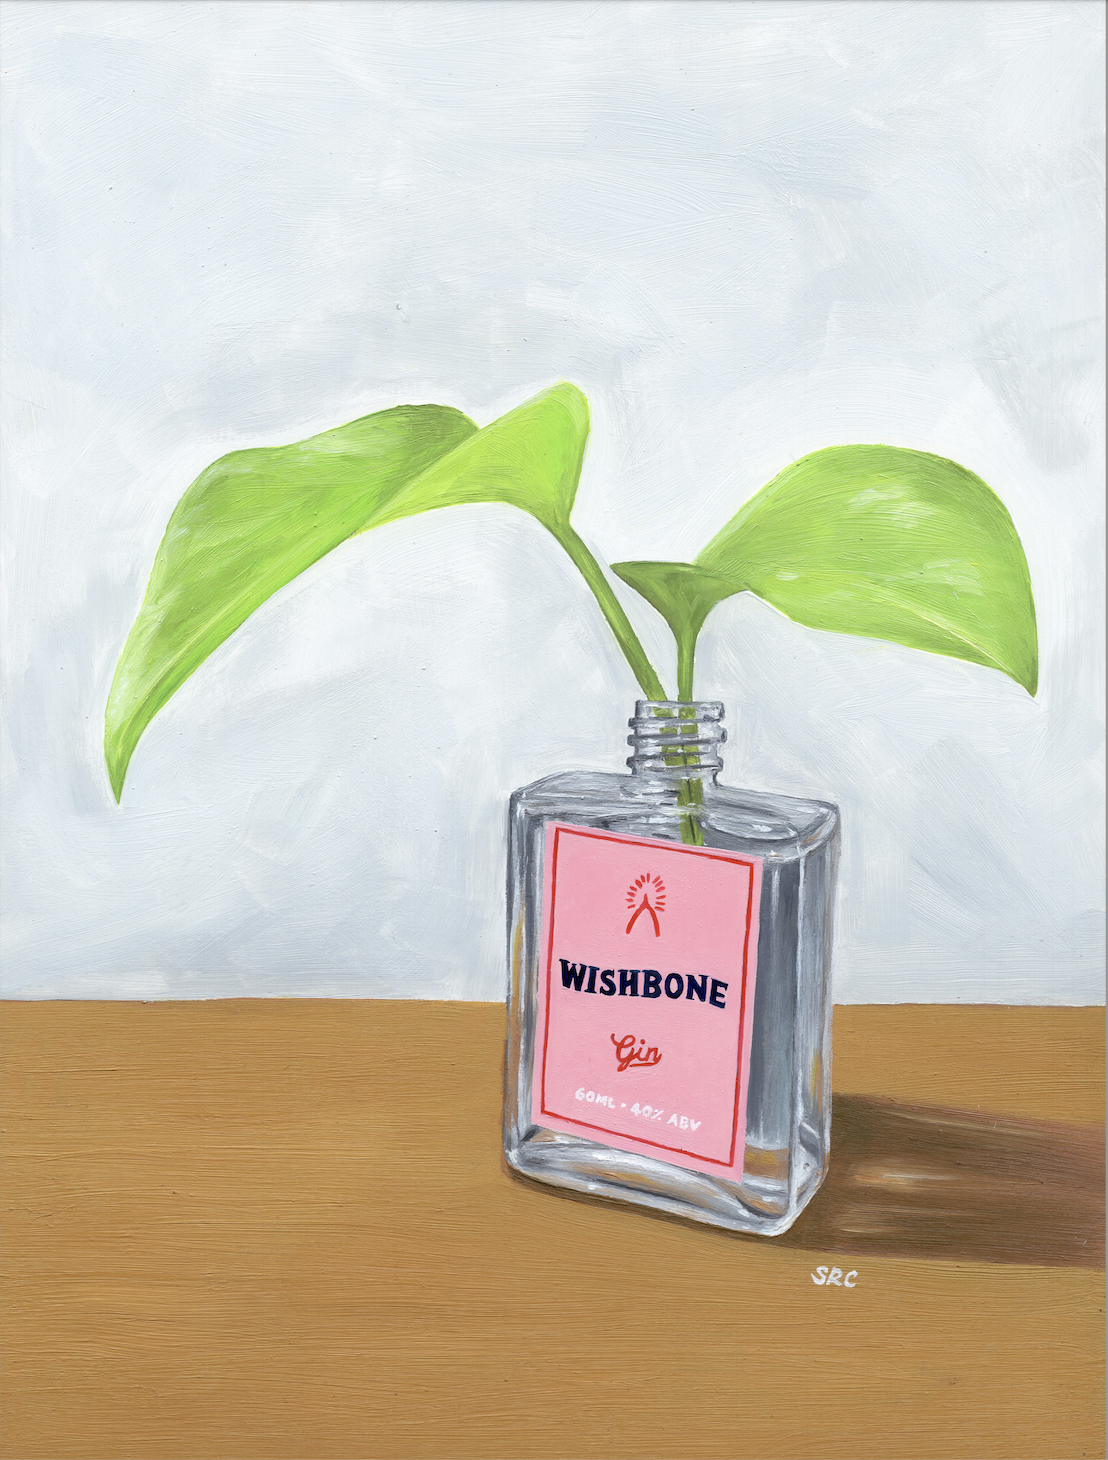 Wishbone Gin and Neon Pothos by Shannon Camden | Lethbridge 20000 2022 Finalists | Lethbridge Gallery